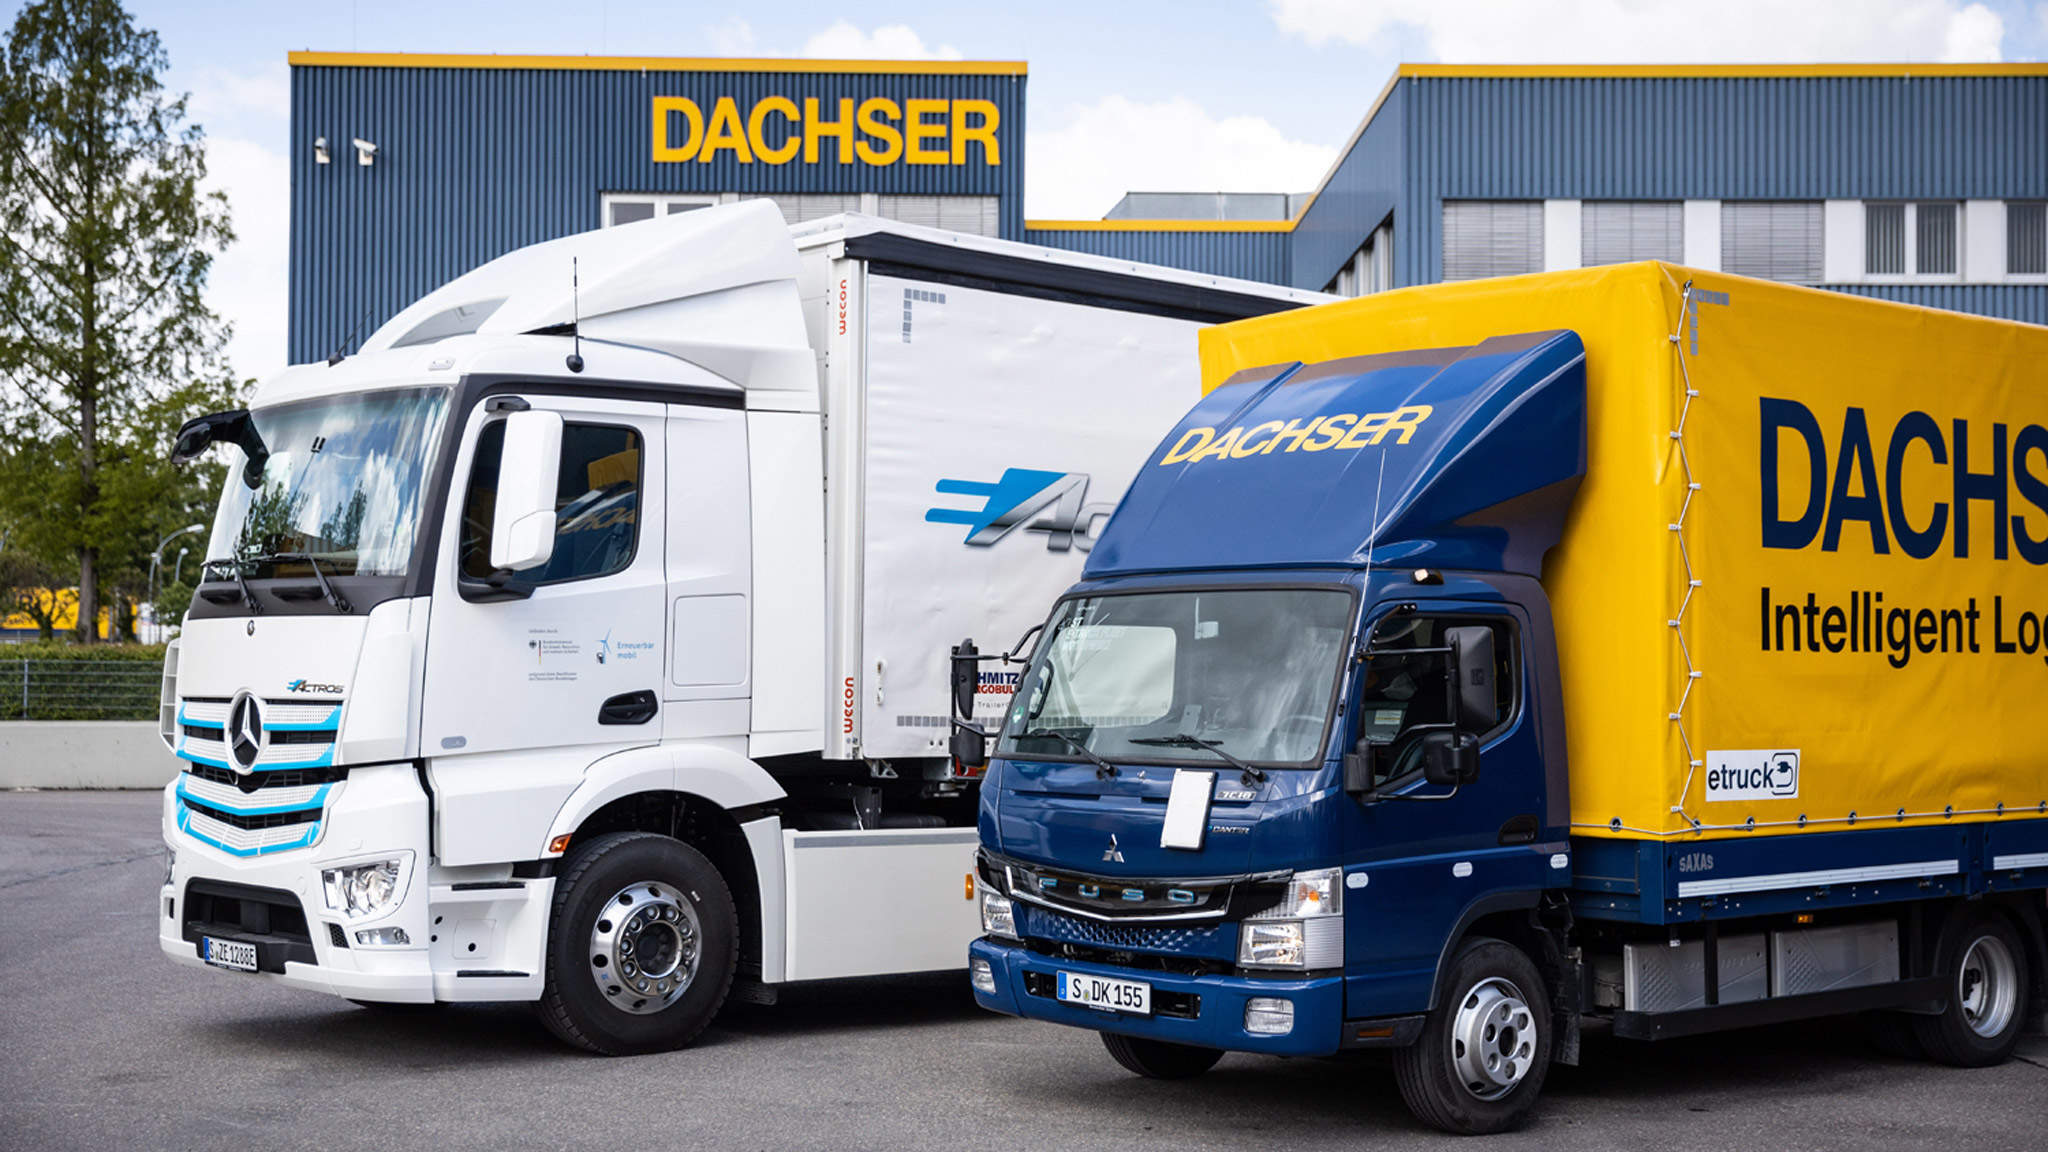 All-electric trucks enabling DACHSER Emission-Free Delivery in Stuttgart: Mercedes-Benz eActros (left) and FUSO eCanter (right)